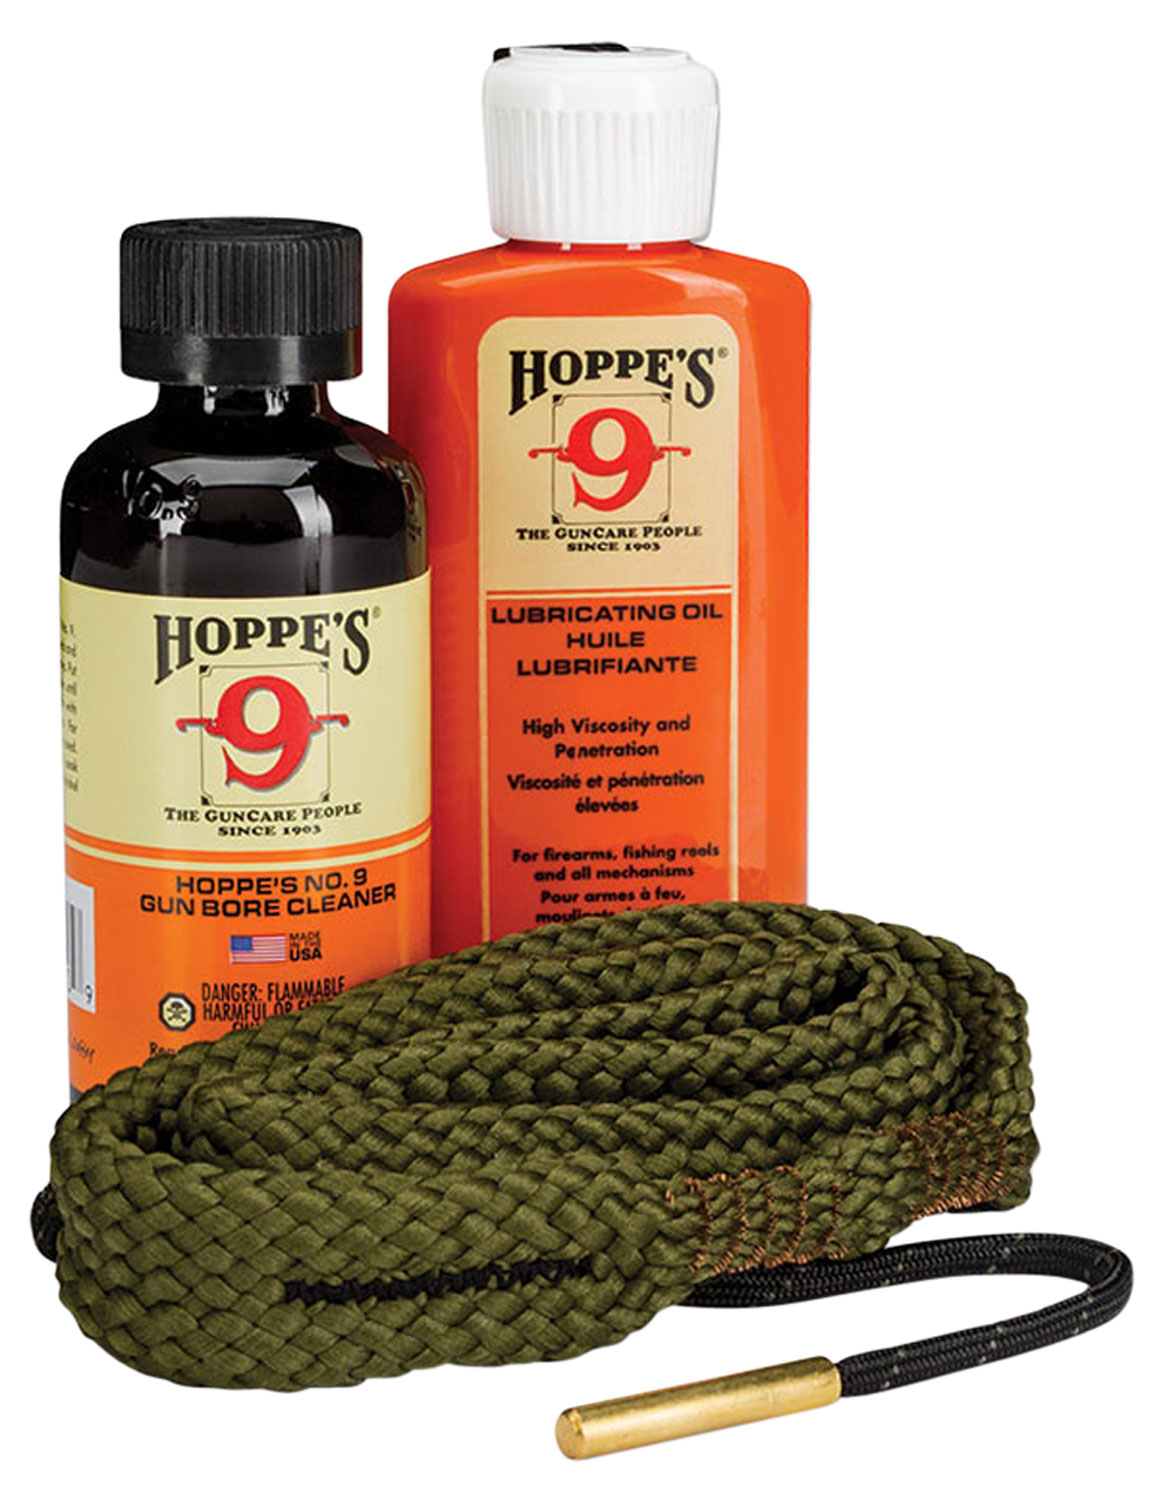 Hoppes 110022 1-2-3 Done Cleaning Kit Includes No.9 Bore Cleaner, BoreSnake & High-Viscosity Oil for 5.56mm / 22 Cal Pistol (Clam Package)